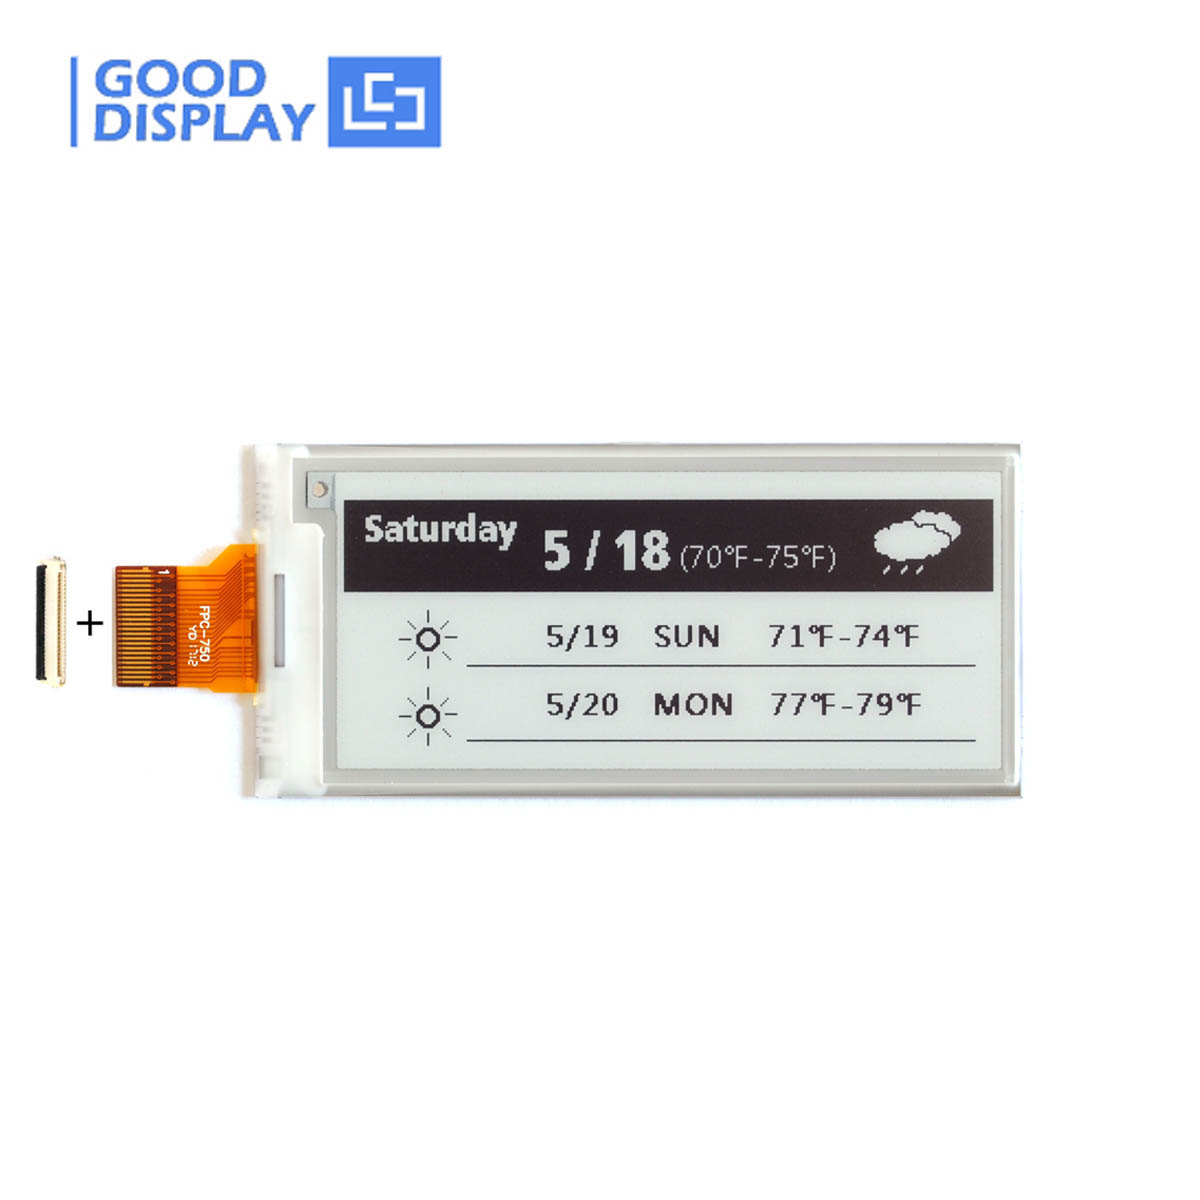 4.2 inch e-ink display SSD1683 support partial, fast refresh,  GDEQ042T81_Good Display